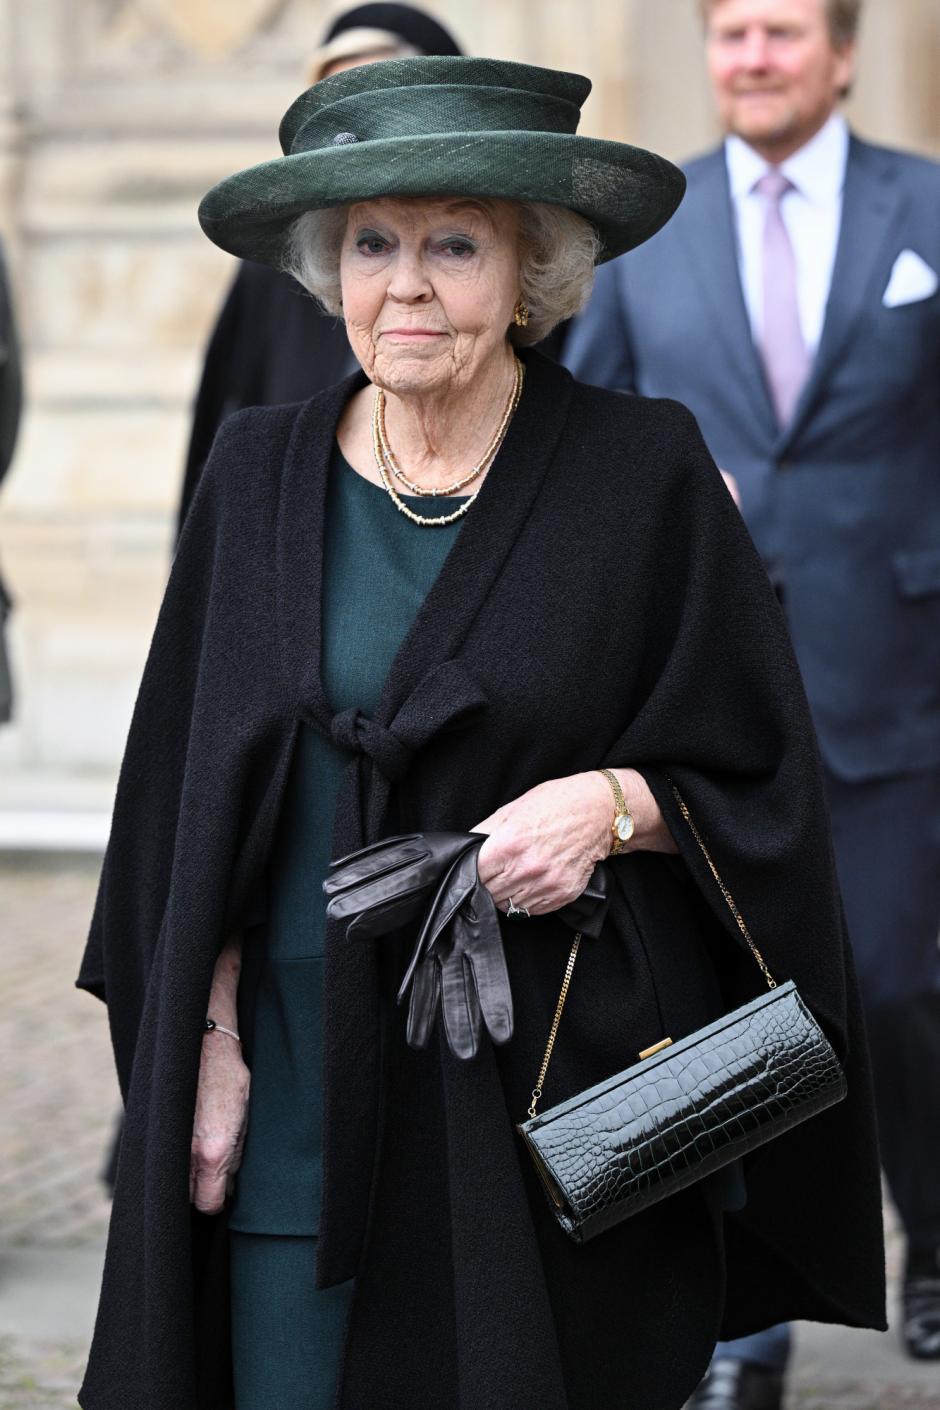 Queen Beatrix of The Netherlands attending a Service of Thanksgiving for Prince Philip, Duke of Edinburgh at WestminsterAbbey in London, Tuesday, March 29, 2022.